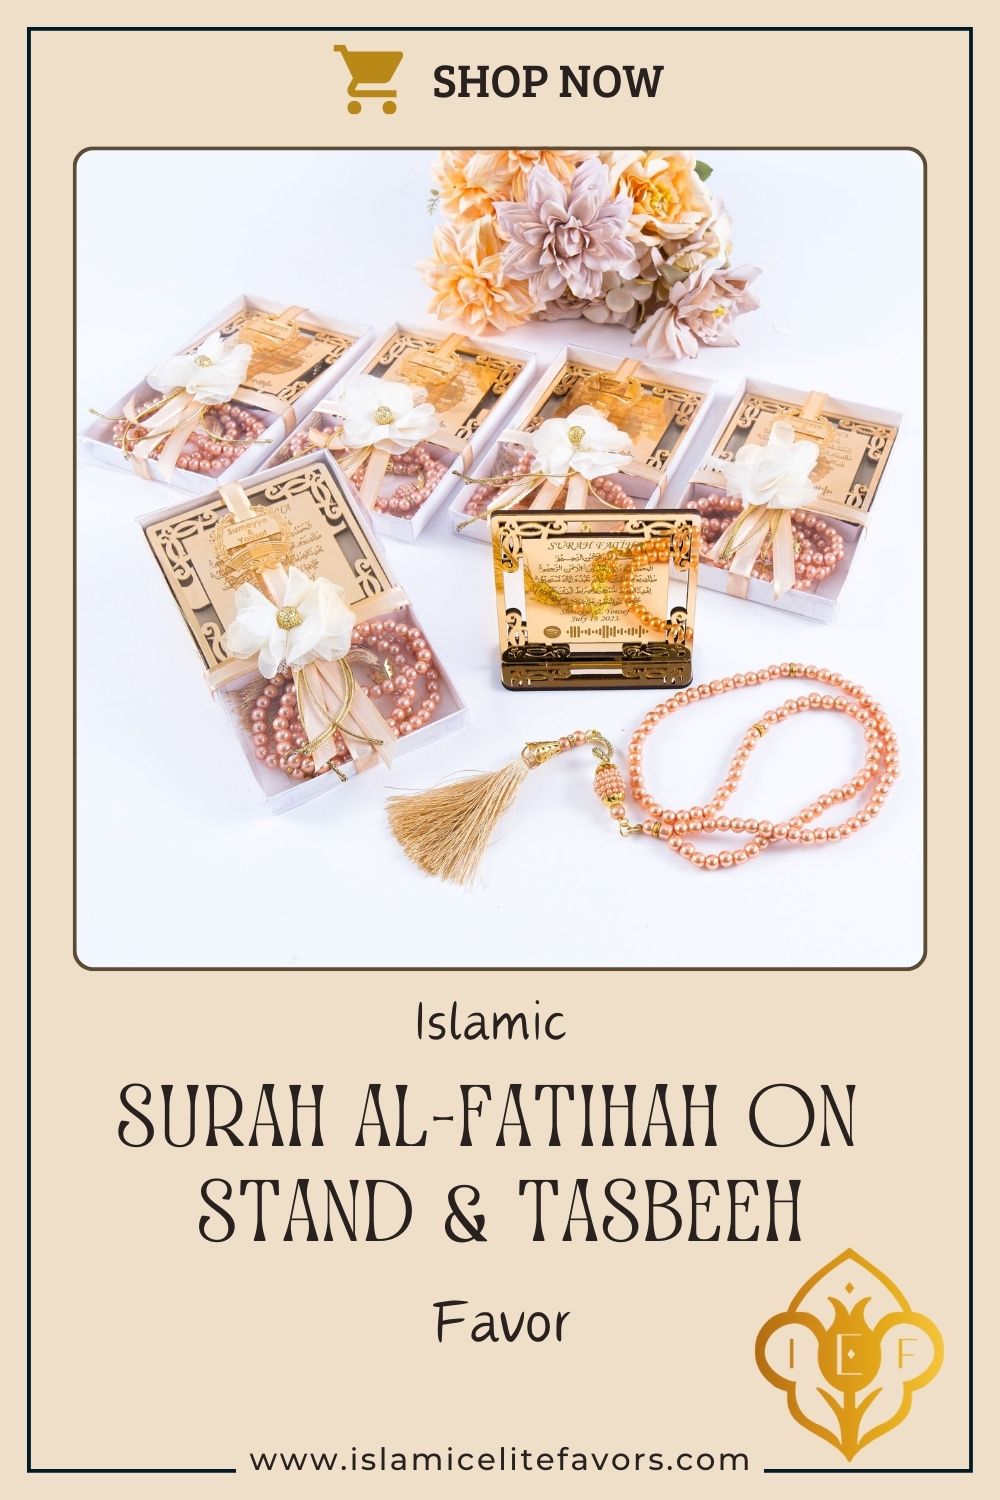 Personalized Surah Al-Fatihah on Stand & Tasbeeh Islamic Wedding Favor - Islamic Elite Favors is a handmade gift shop offering a wide variety of unique and personalized gifts for all occasions. Whether you're looking for the perfect Ramadan, Eid, Hajj, wedding gift or something special for a birthday, baby shower or anniversary, we have something for everyone. High quality, made with love.